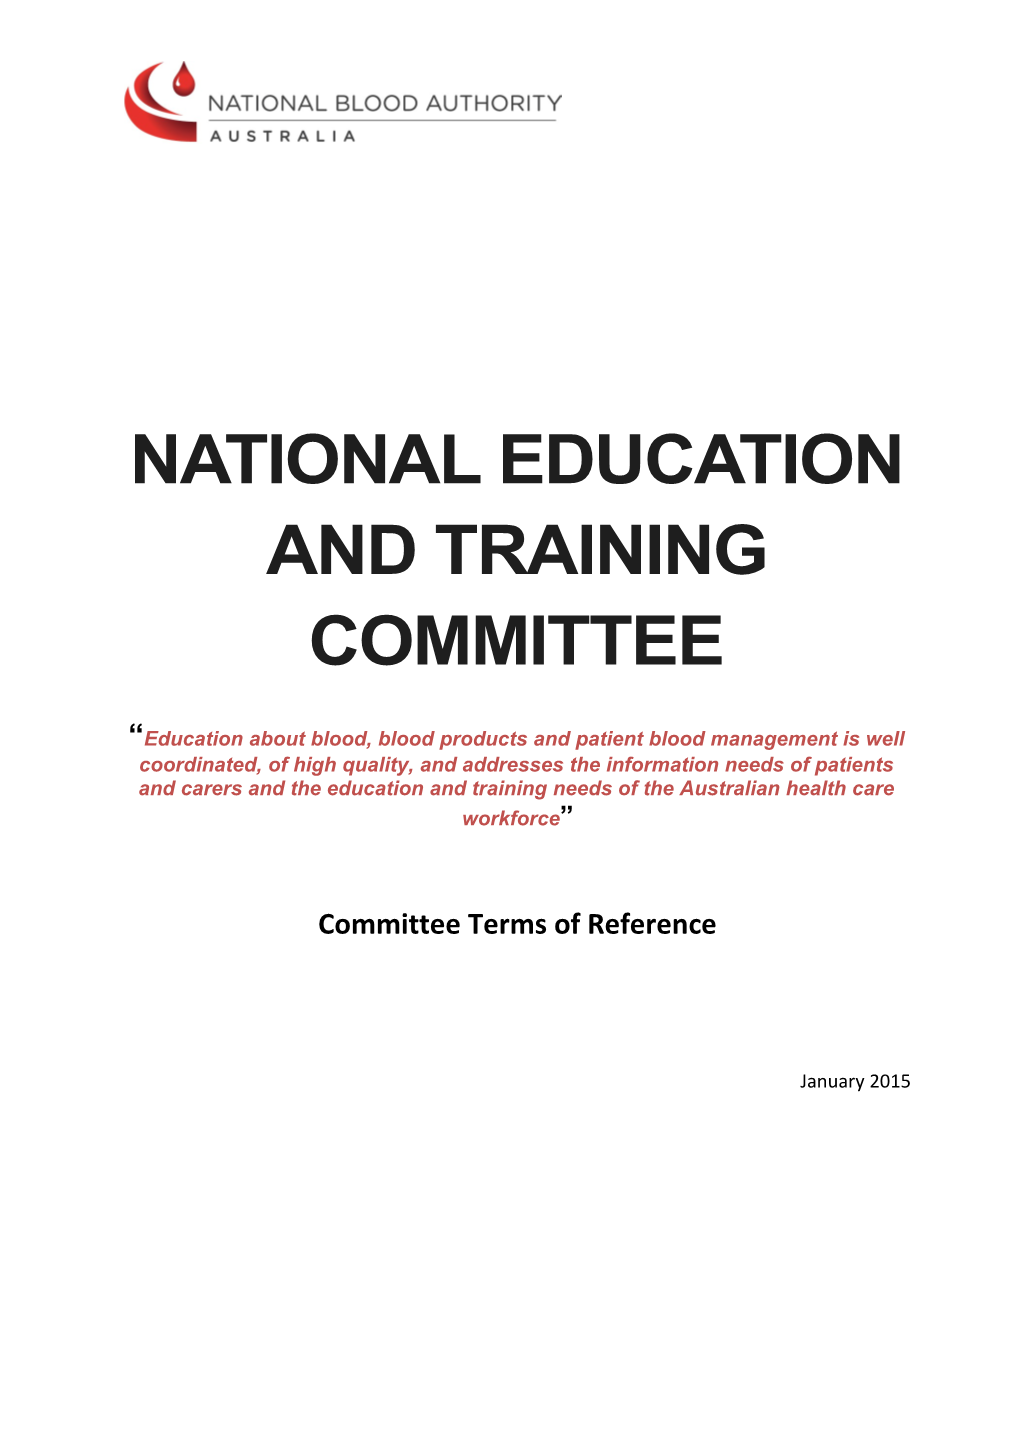 National Education and Training Committee